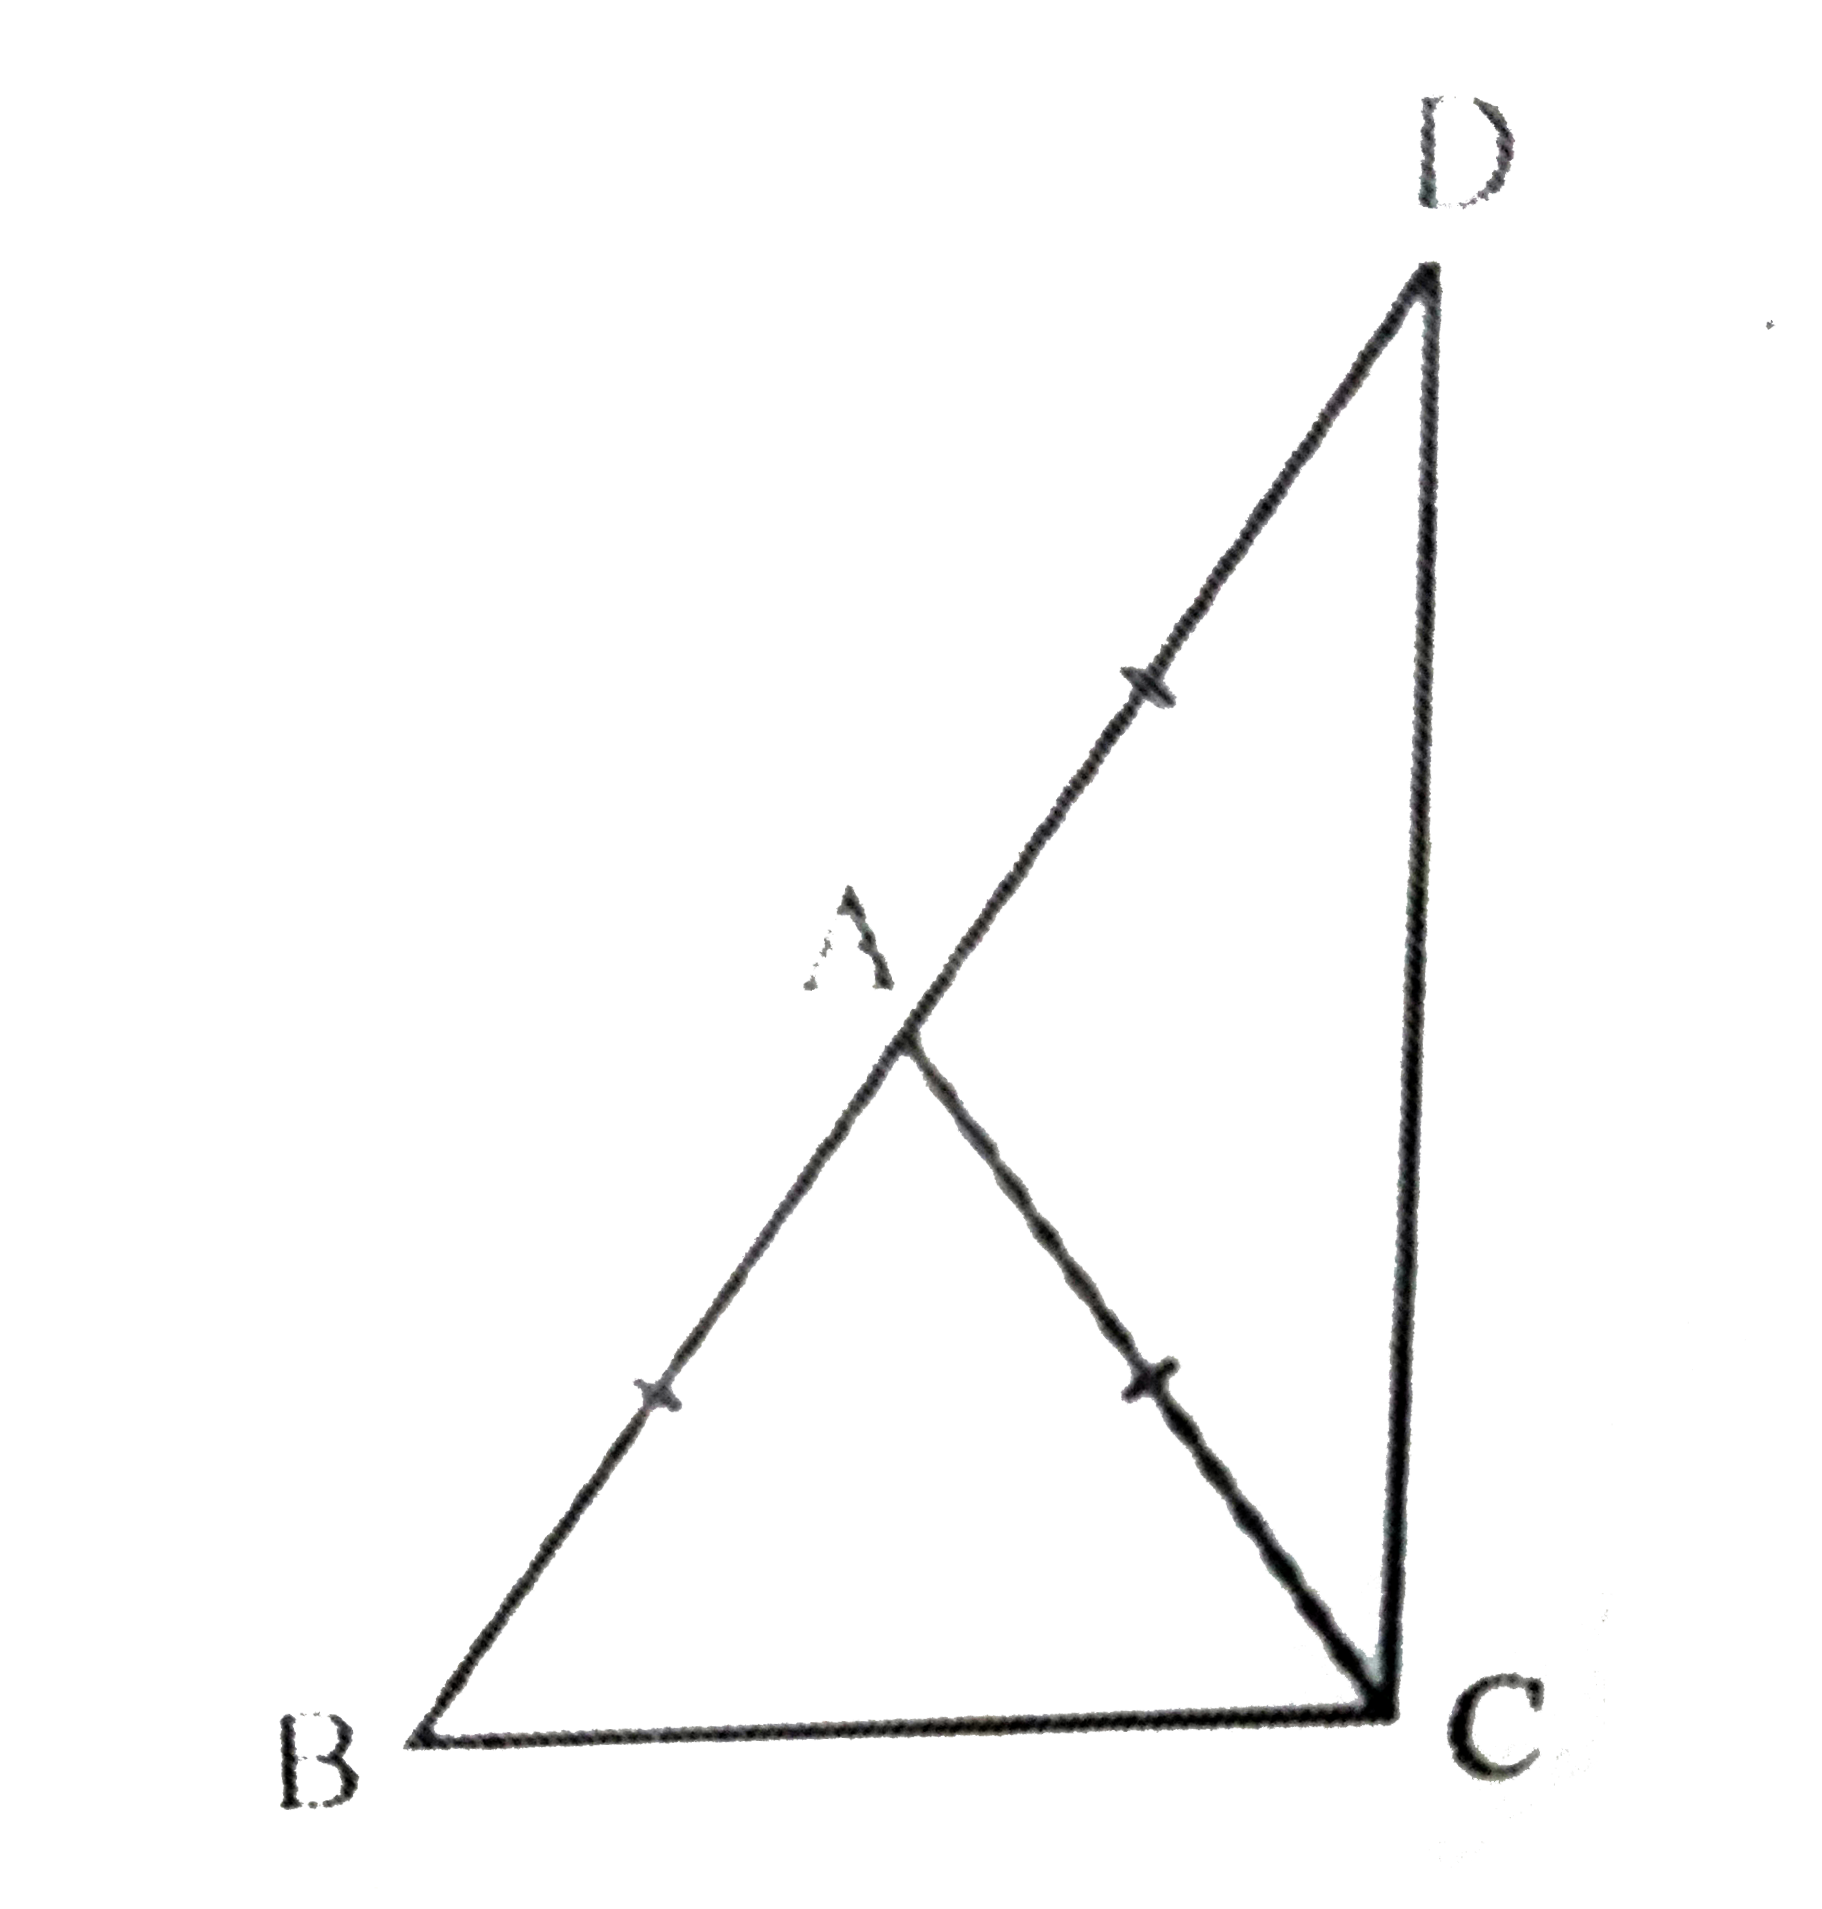 Delta ABC is an  isosceles triangle in which A B= A C. Side BA is  produced to D such that A D = A B (see Fig. 7.34). Show that /B C D is a right angle.